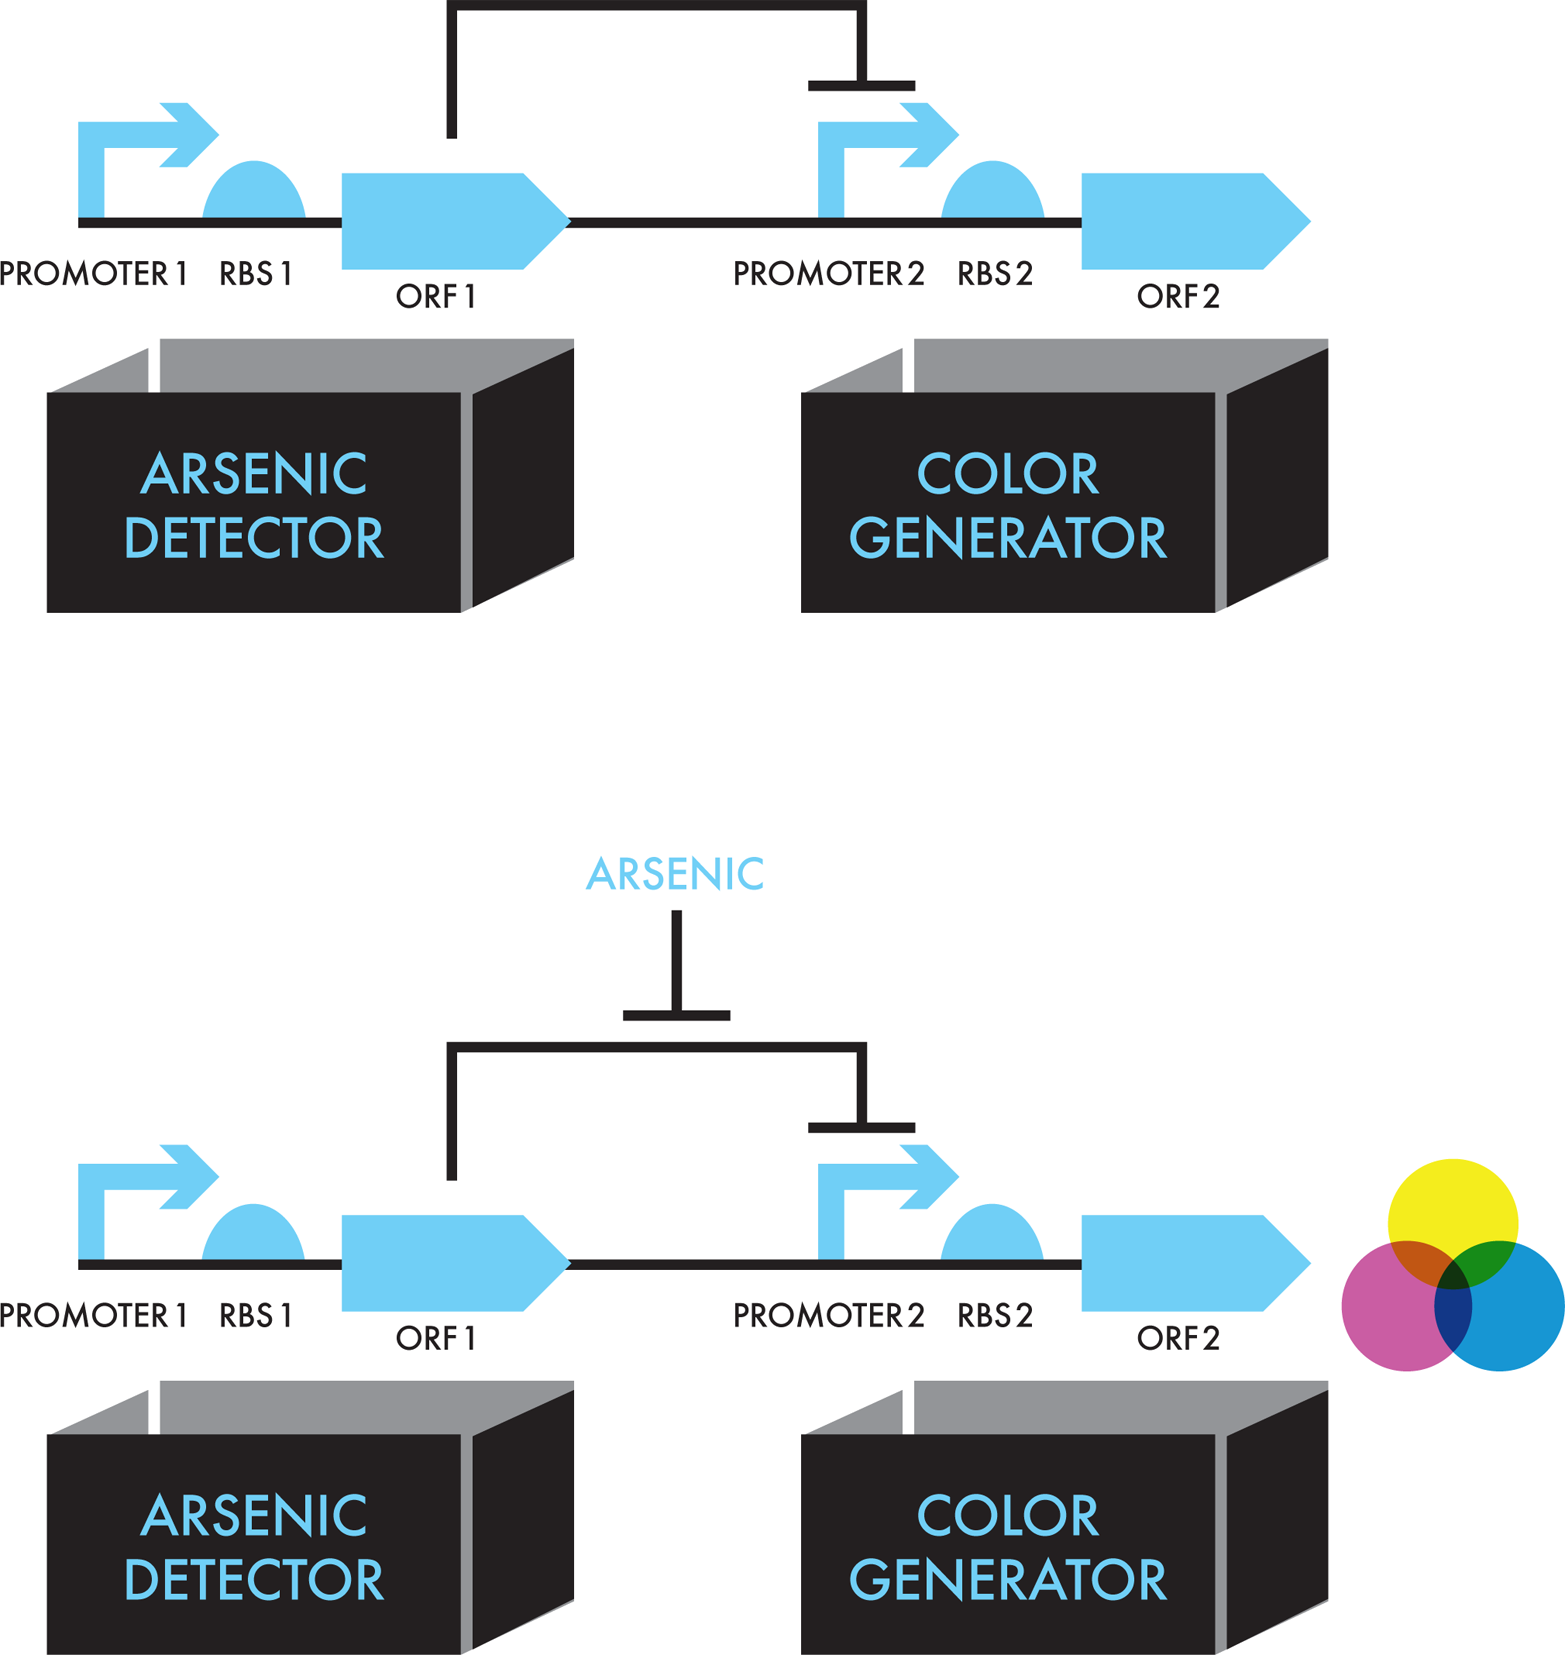 Unpacking the “black box” devices into parts. The arsenic-detector device and the color-generator device are each composed of a promoter, an RBS, and an ORF. In the absence of arsenic (top), the product of ORF 1 inhibits promoter 2, and therefore the color generator is “off.” Relief of inhibition in the presence of arsenic (bottom) frees the color generator device to turn “on.”